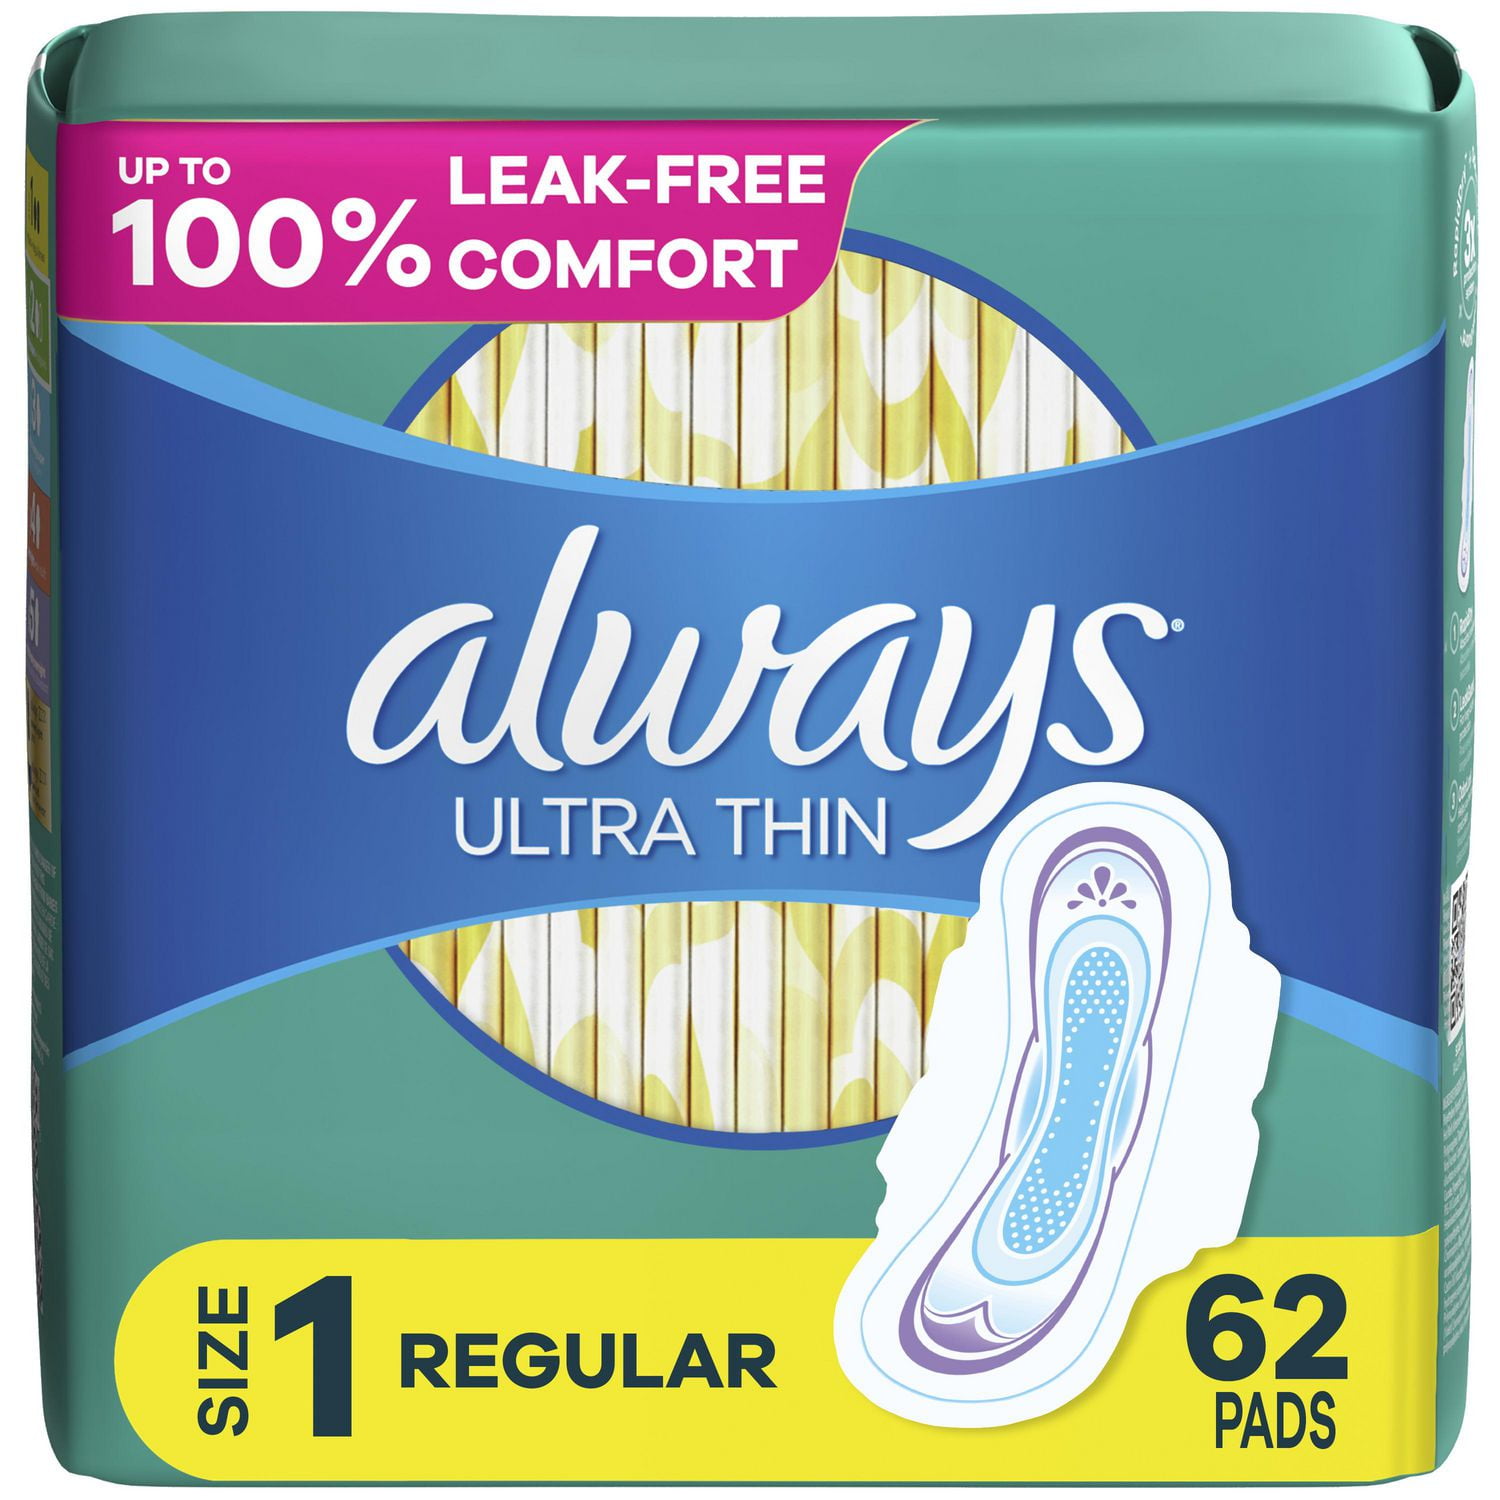 Save on Always Ultra Thin Pads with Wings Long Super Size 2 Order Online  Delivery